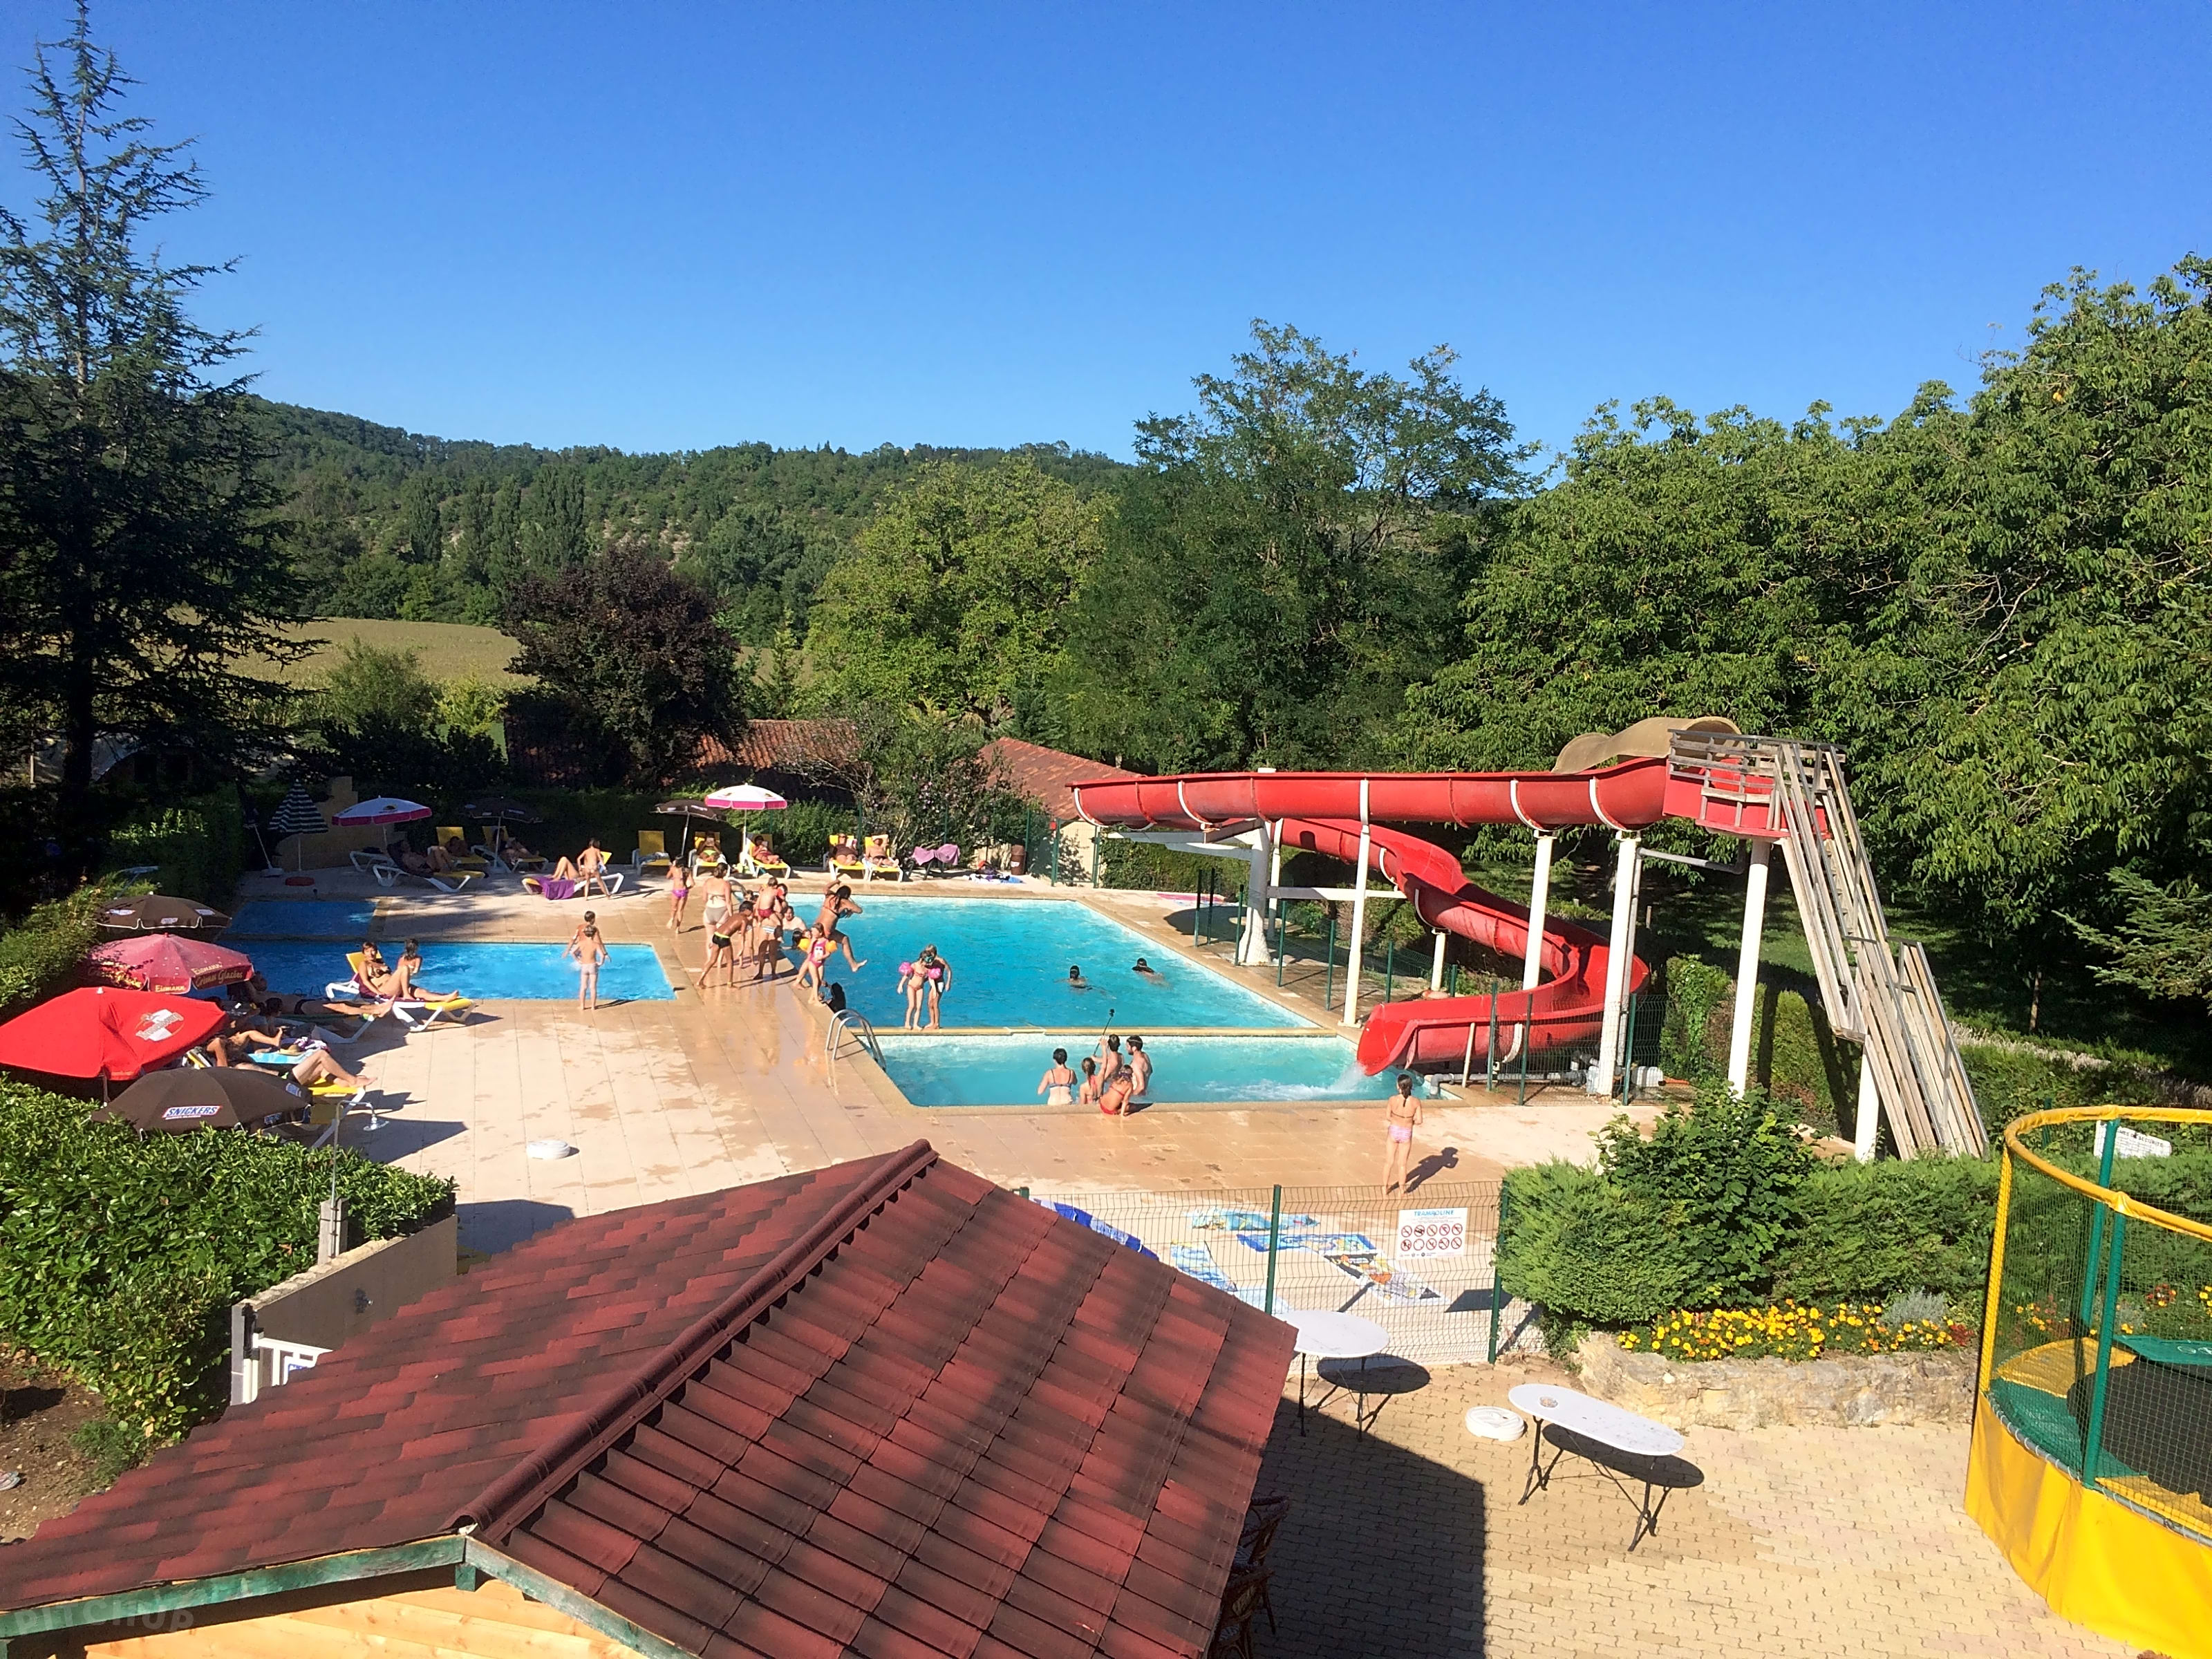 Camping Le Céou, Saint-Cybranet - Updated 2021 prices - Pitchup®